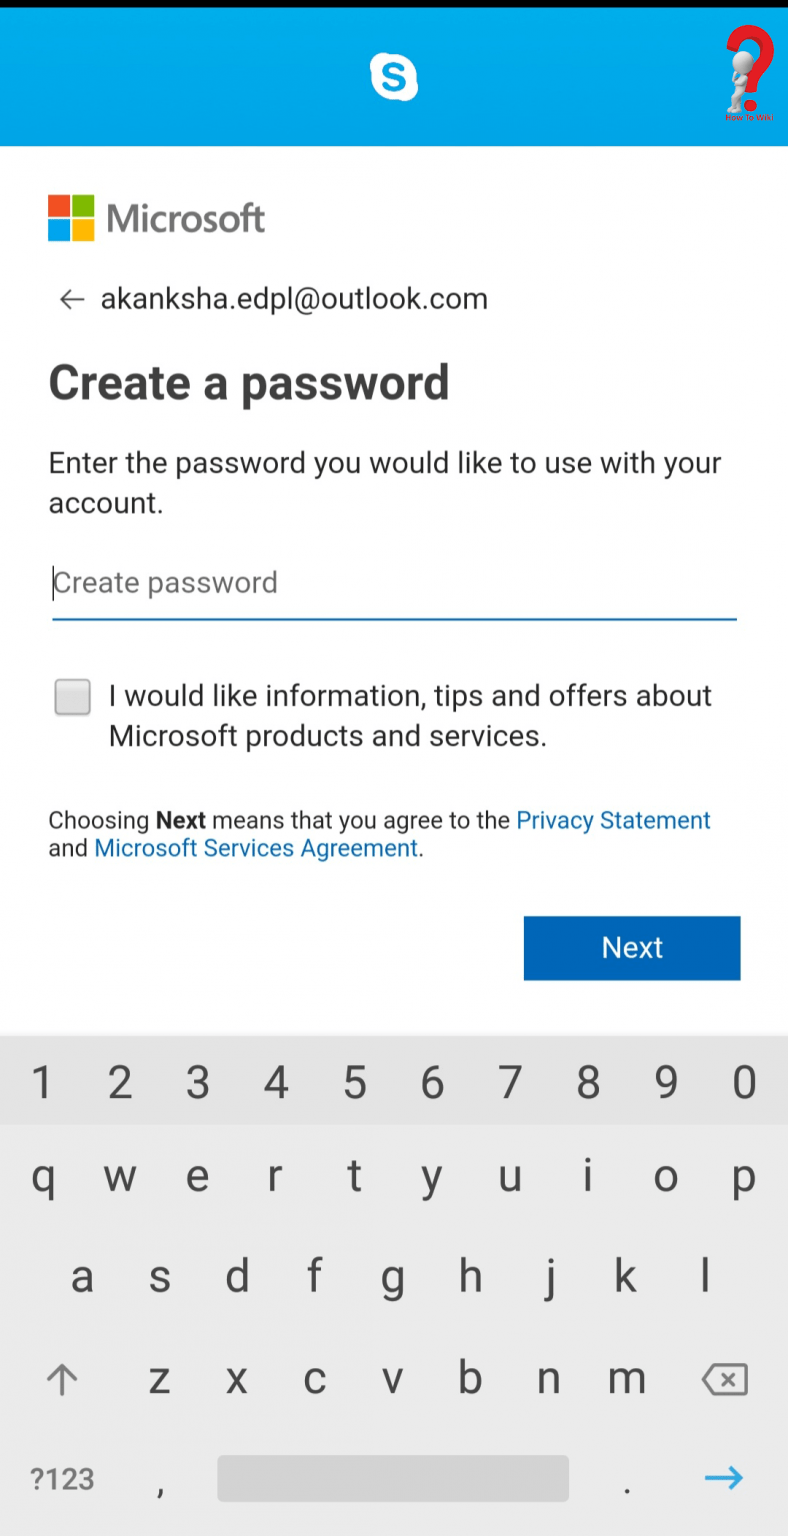 do you need a microsoft account for skype